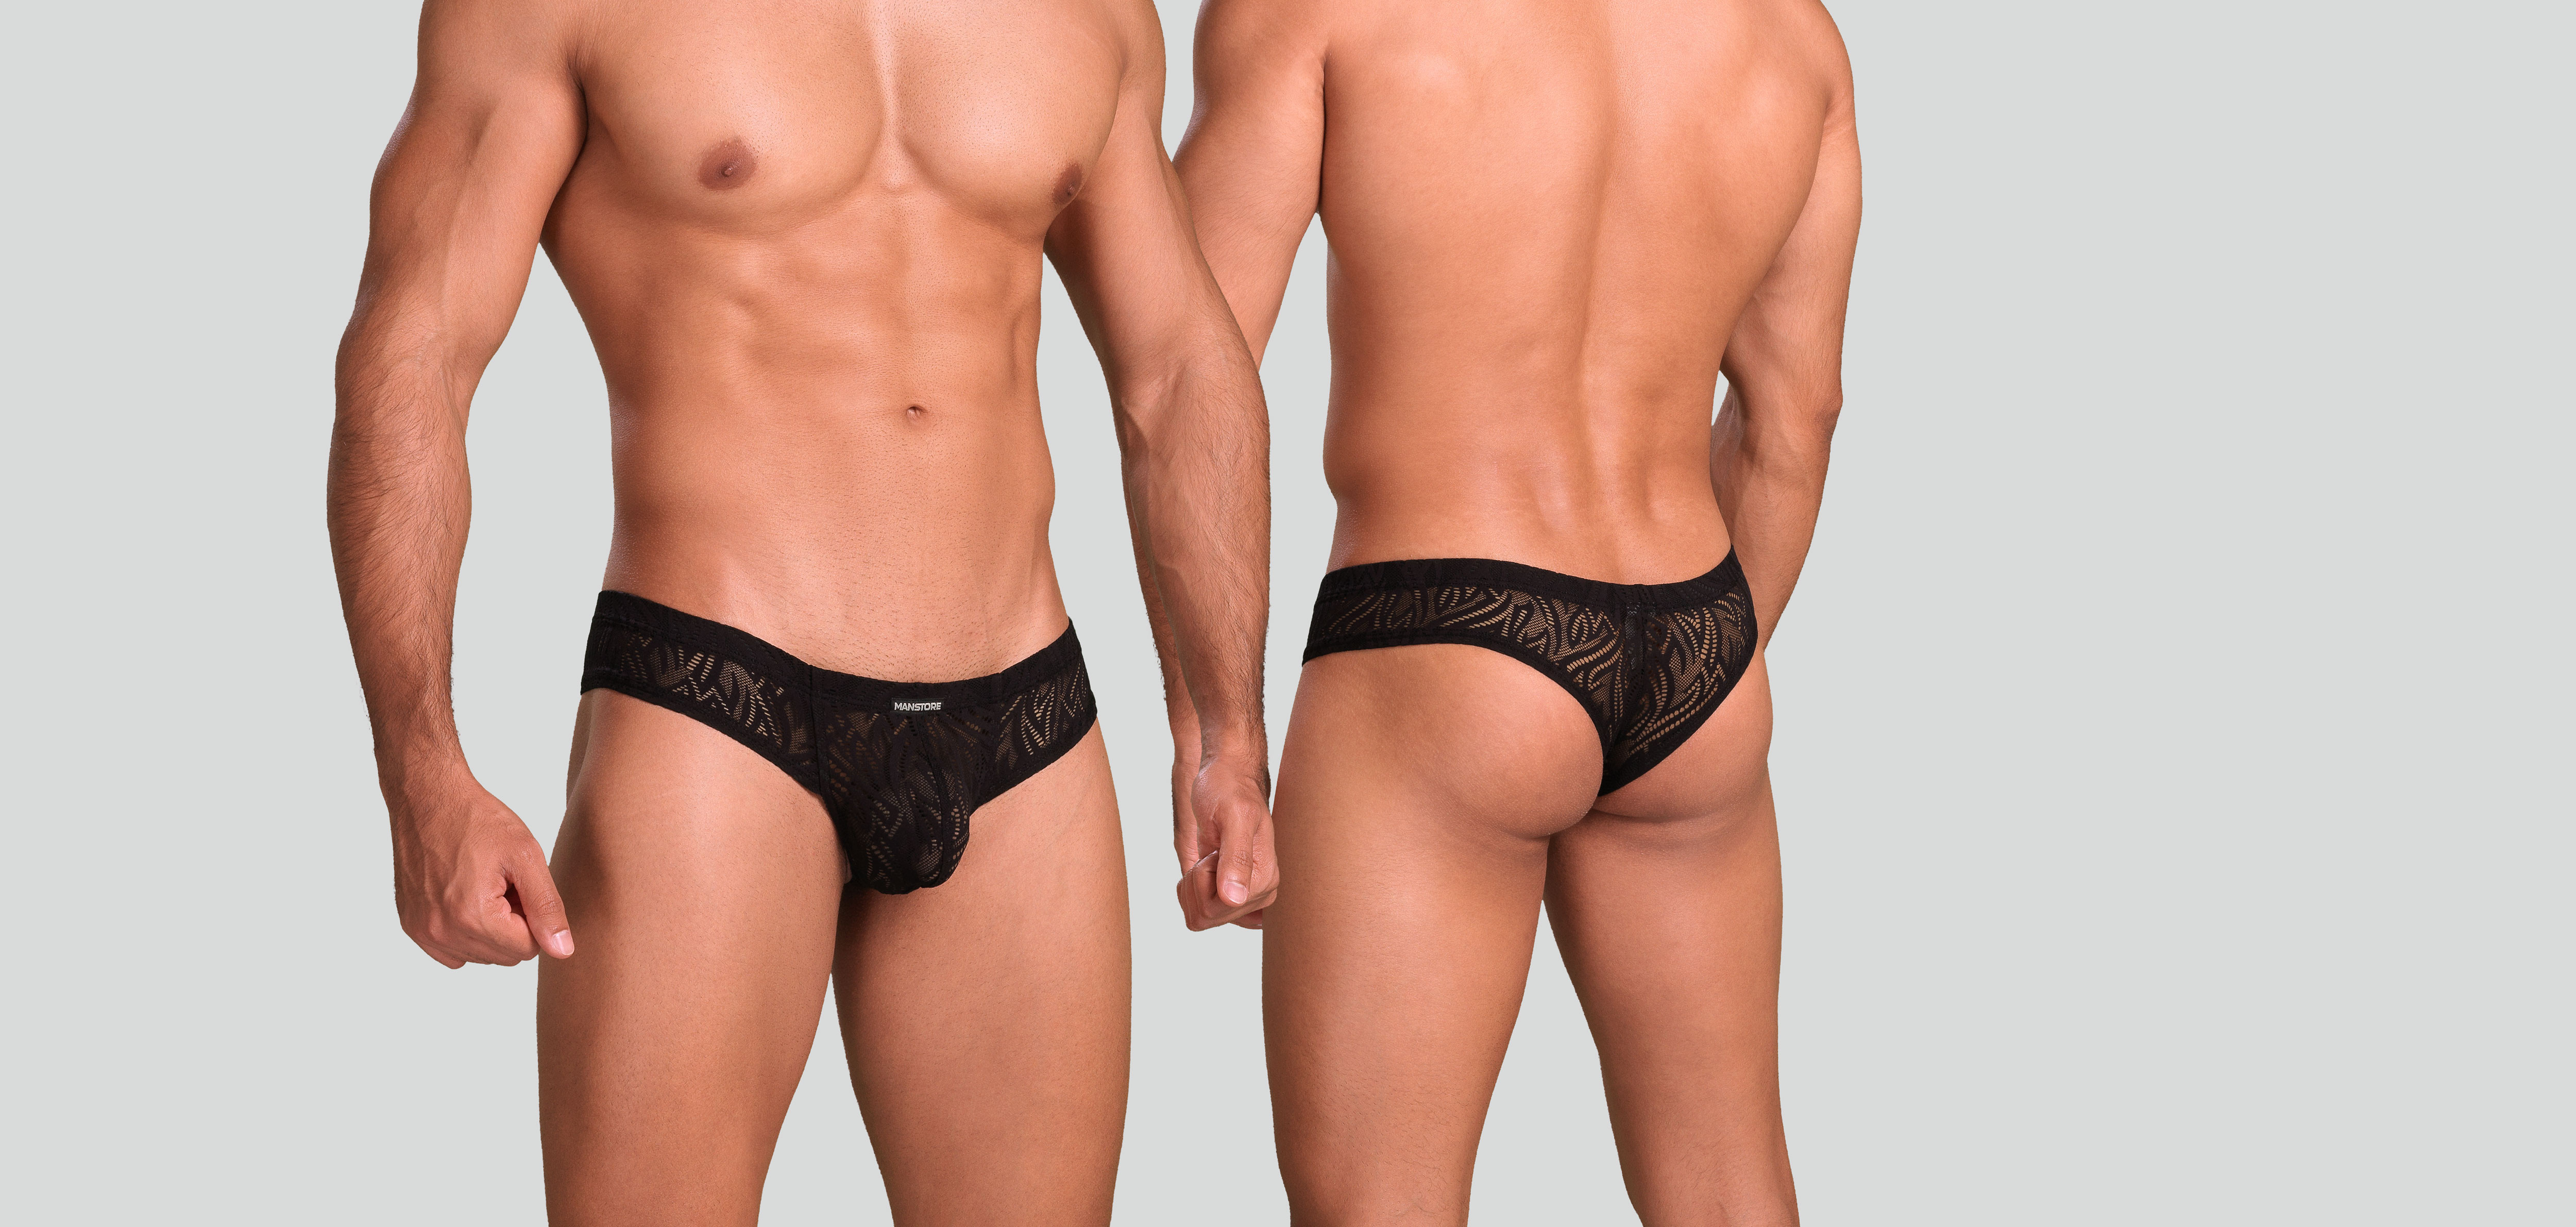 Manstore M914 Cheeky Brief, color Nee